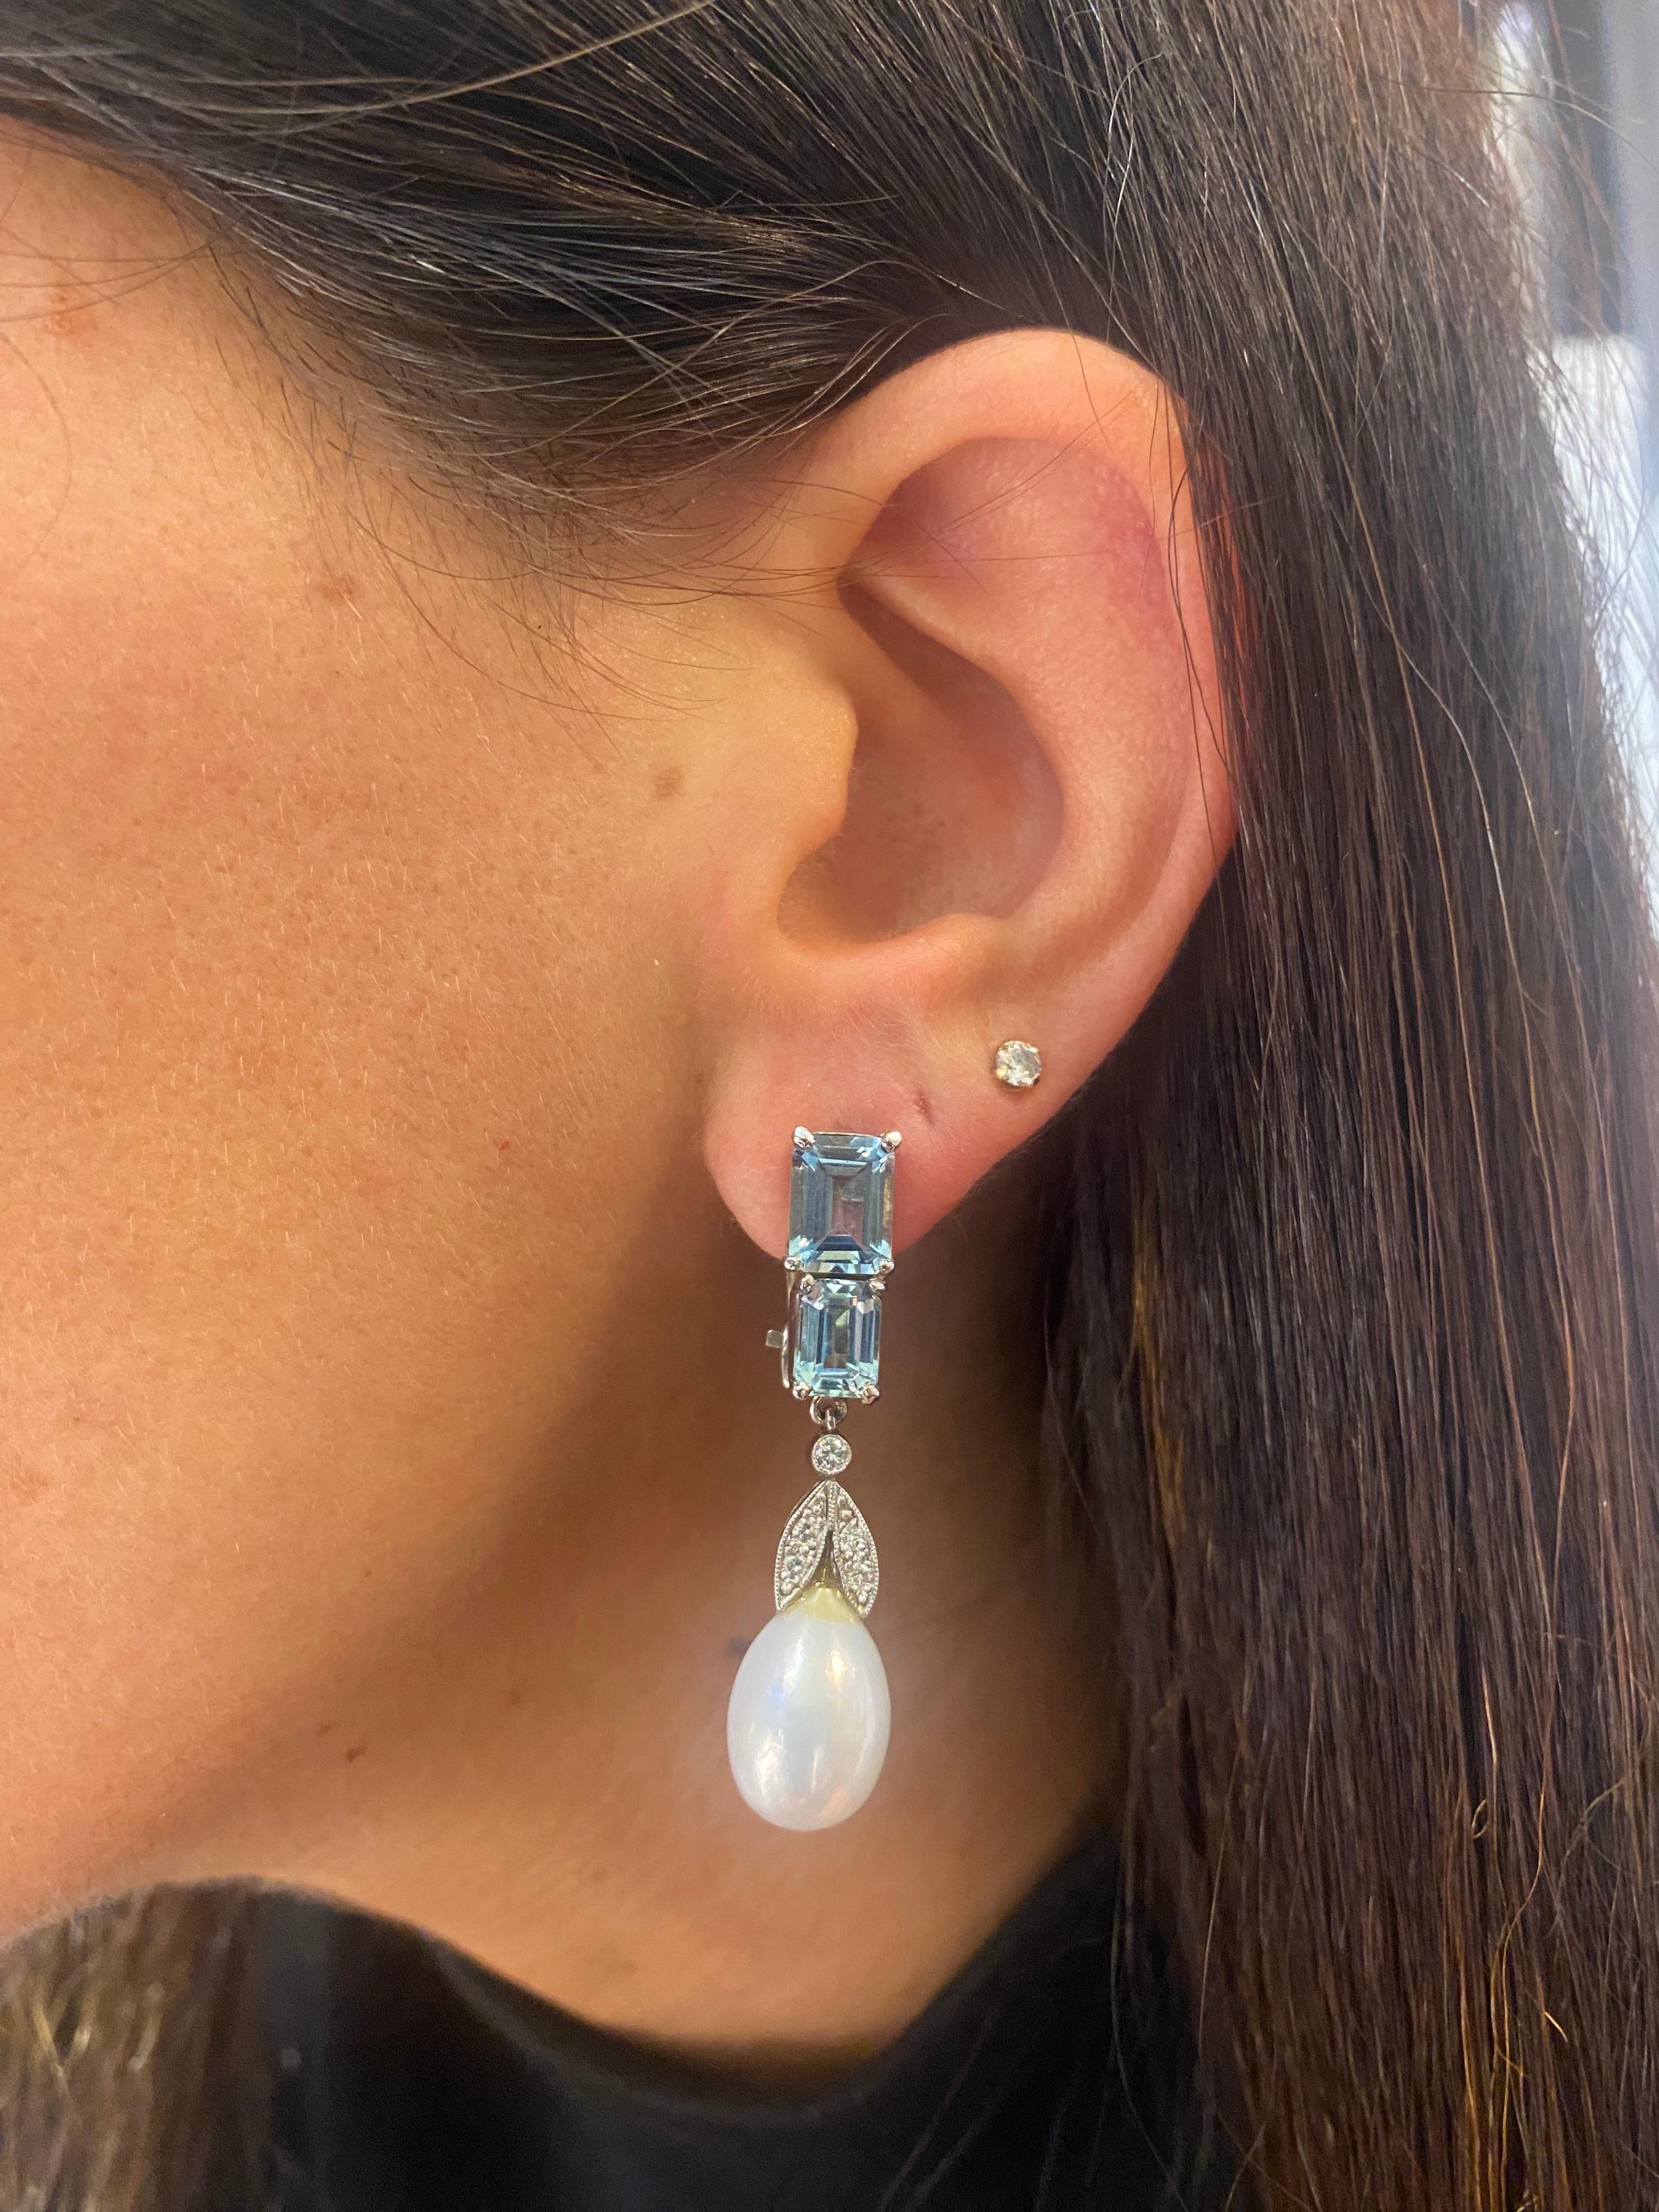 Aquamarine and Pearl Earrings

Emerald-cut aquamarine earrings with 2 cultured pearls, adorned with round cut diamonds. 

Approximate Aquamarine Weight: 4.23 carat 
Approximate Diamond Weight: .16 carats
Approximate Pearls Measurements: 9.4 - 13.3